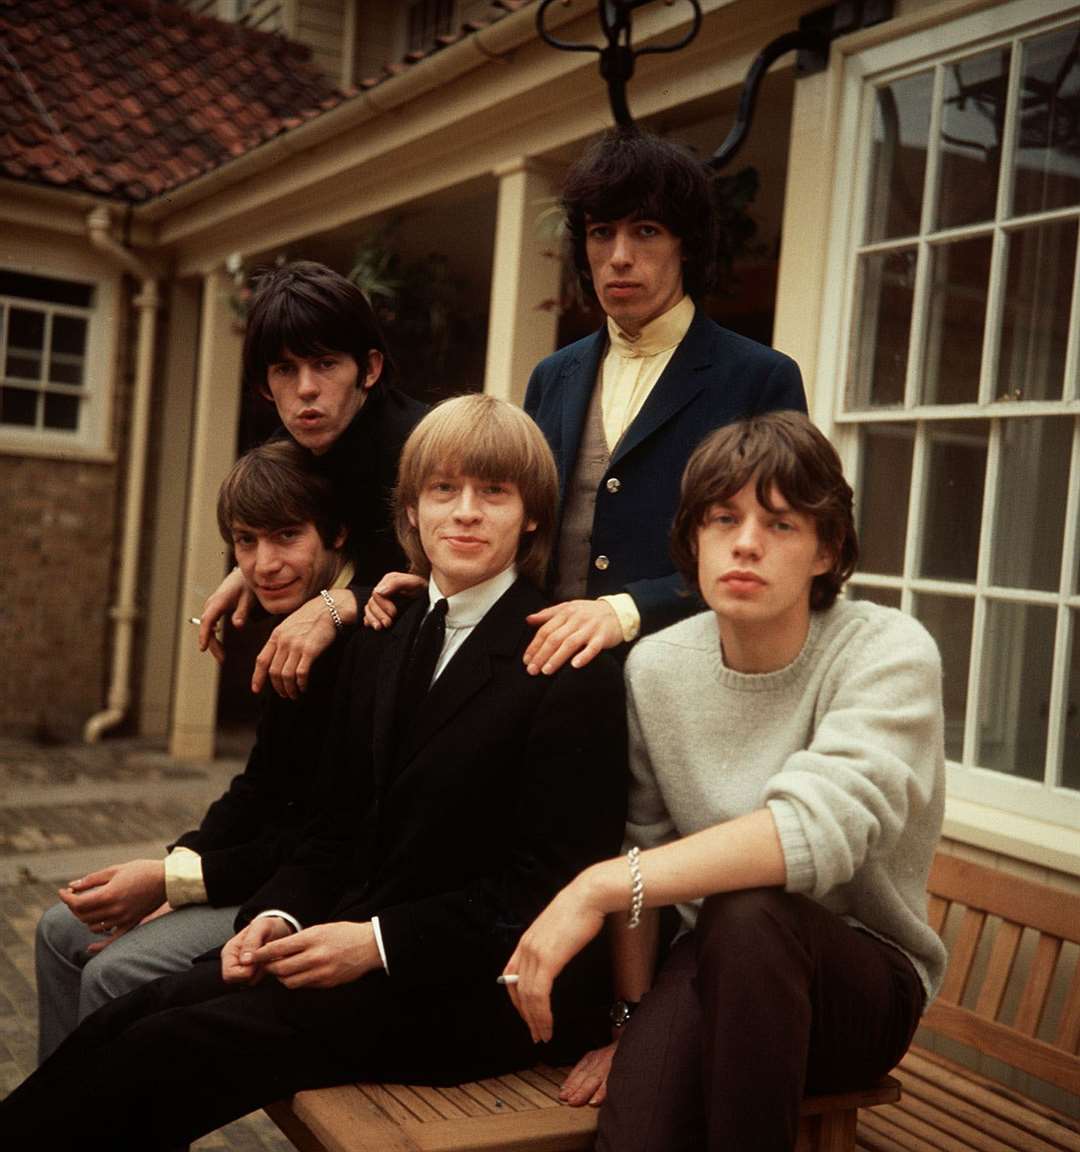 File photo dated 12/9/64 of The Rolling Stones (from left to right) Charlie Watts, Keith Richards, Brian Jones, Bill Wyman and Mick Jagger. PA Photos